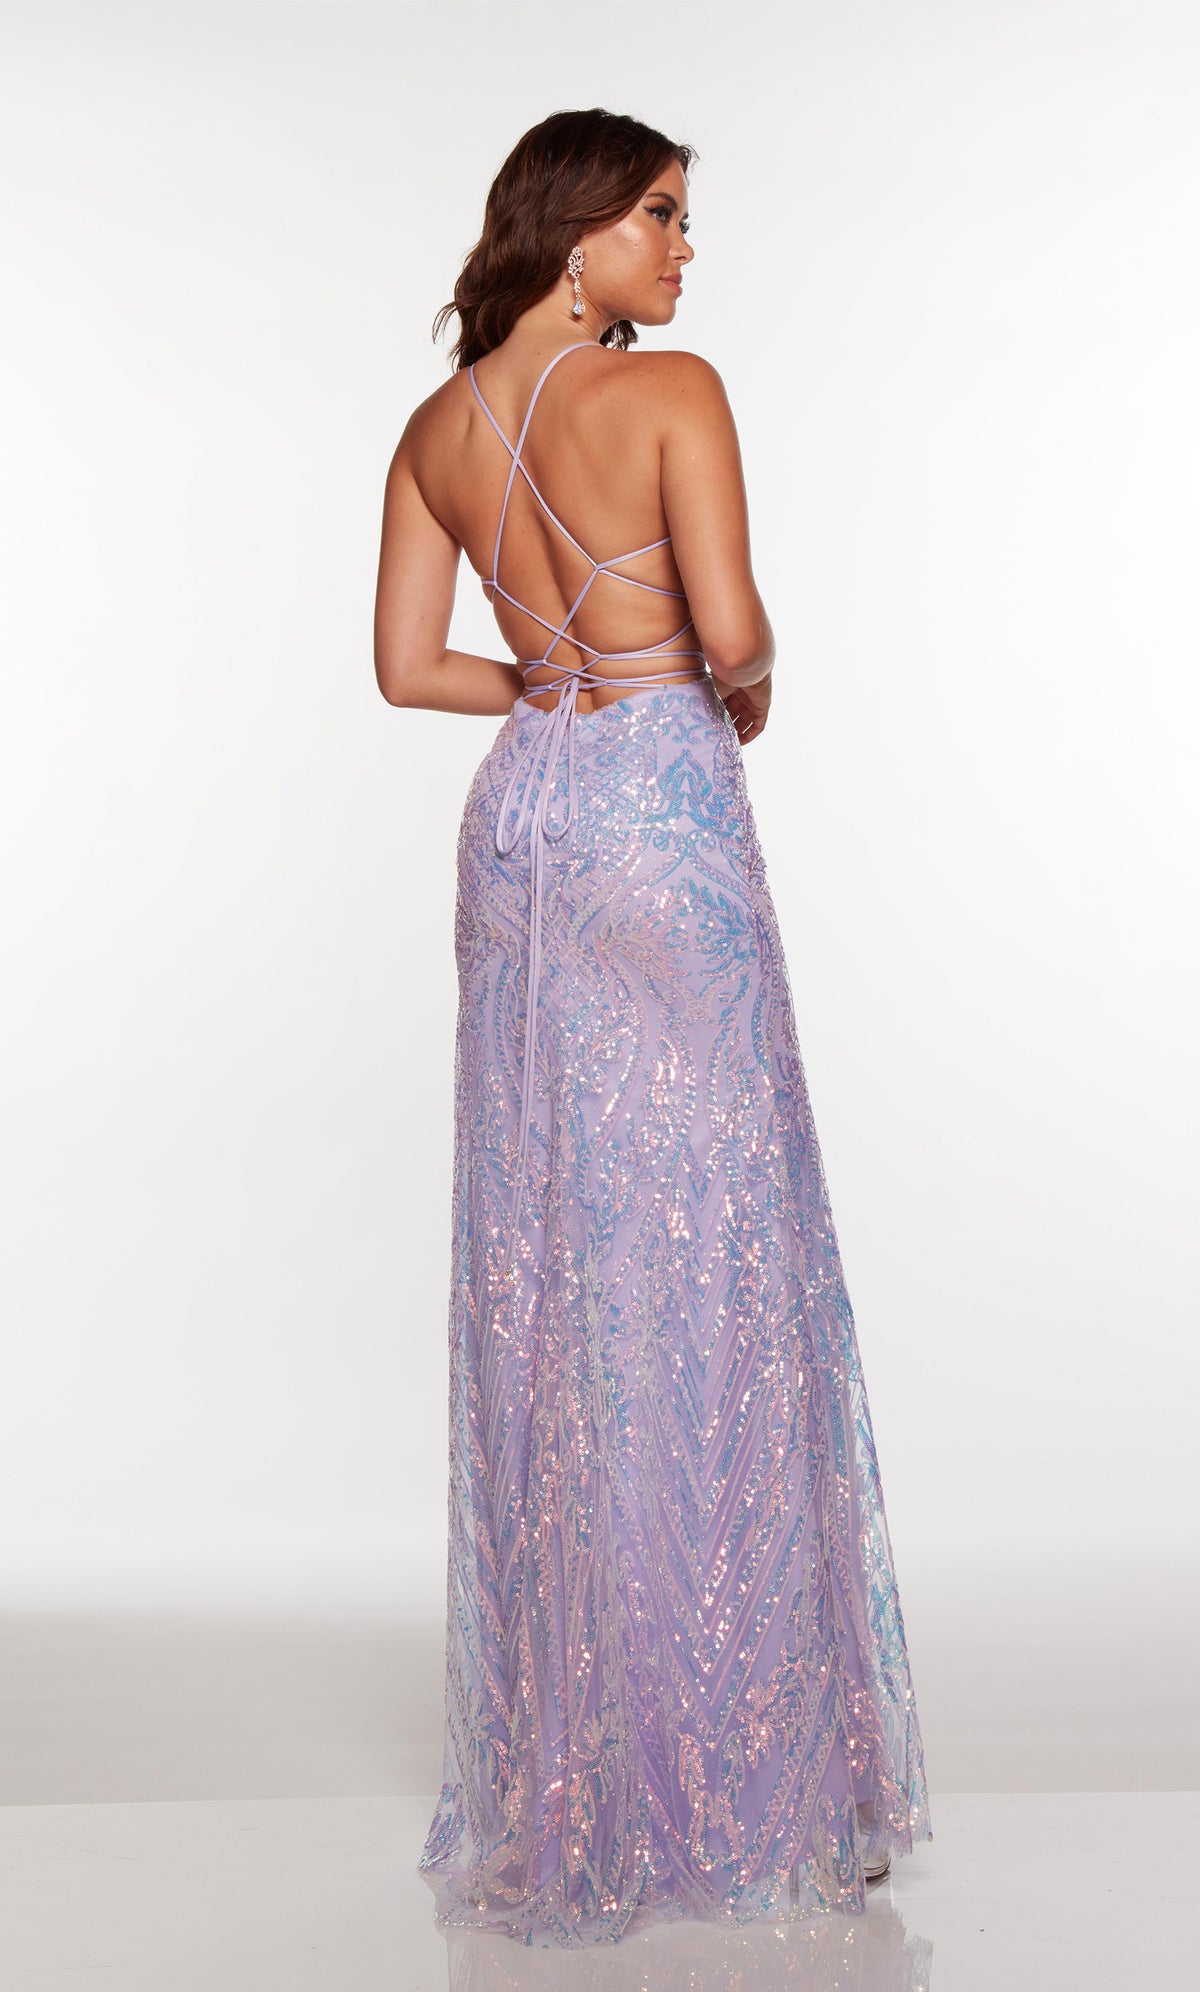 Strappy back prom dress in purple iridescent sequins.